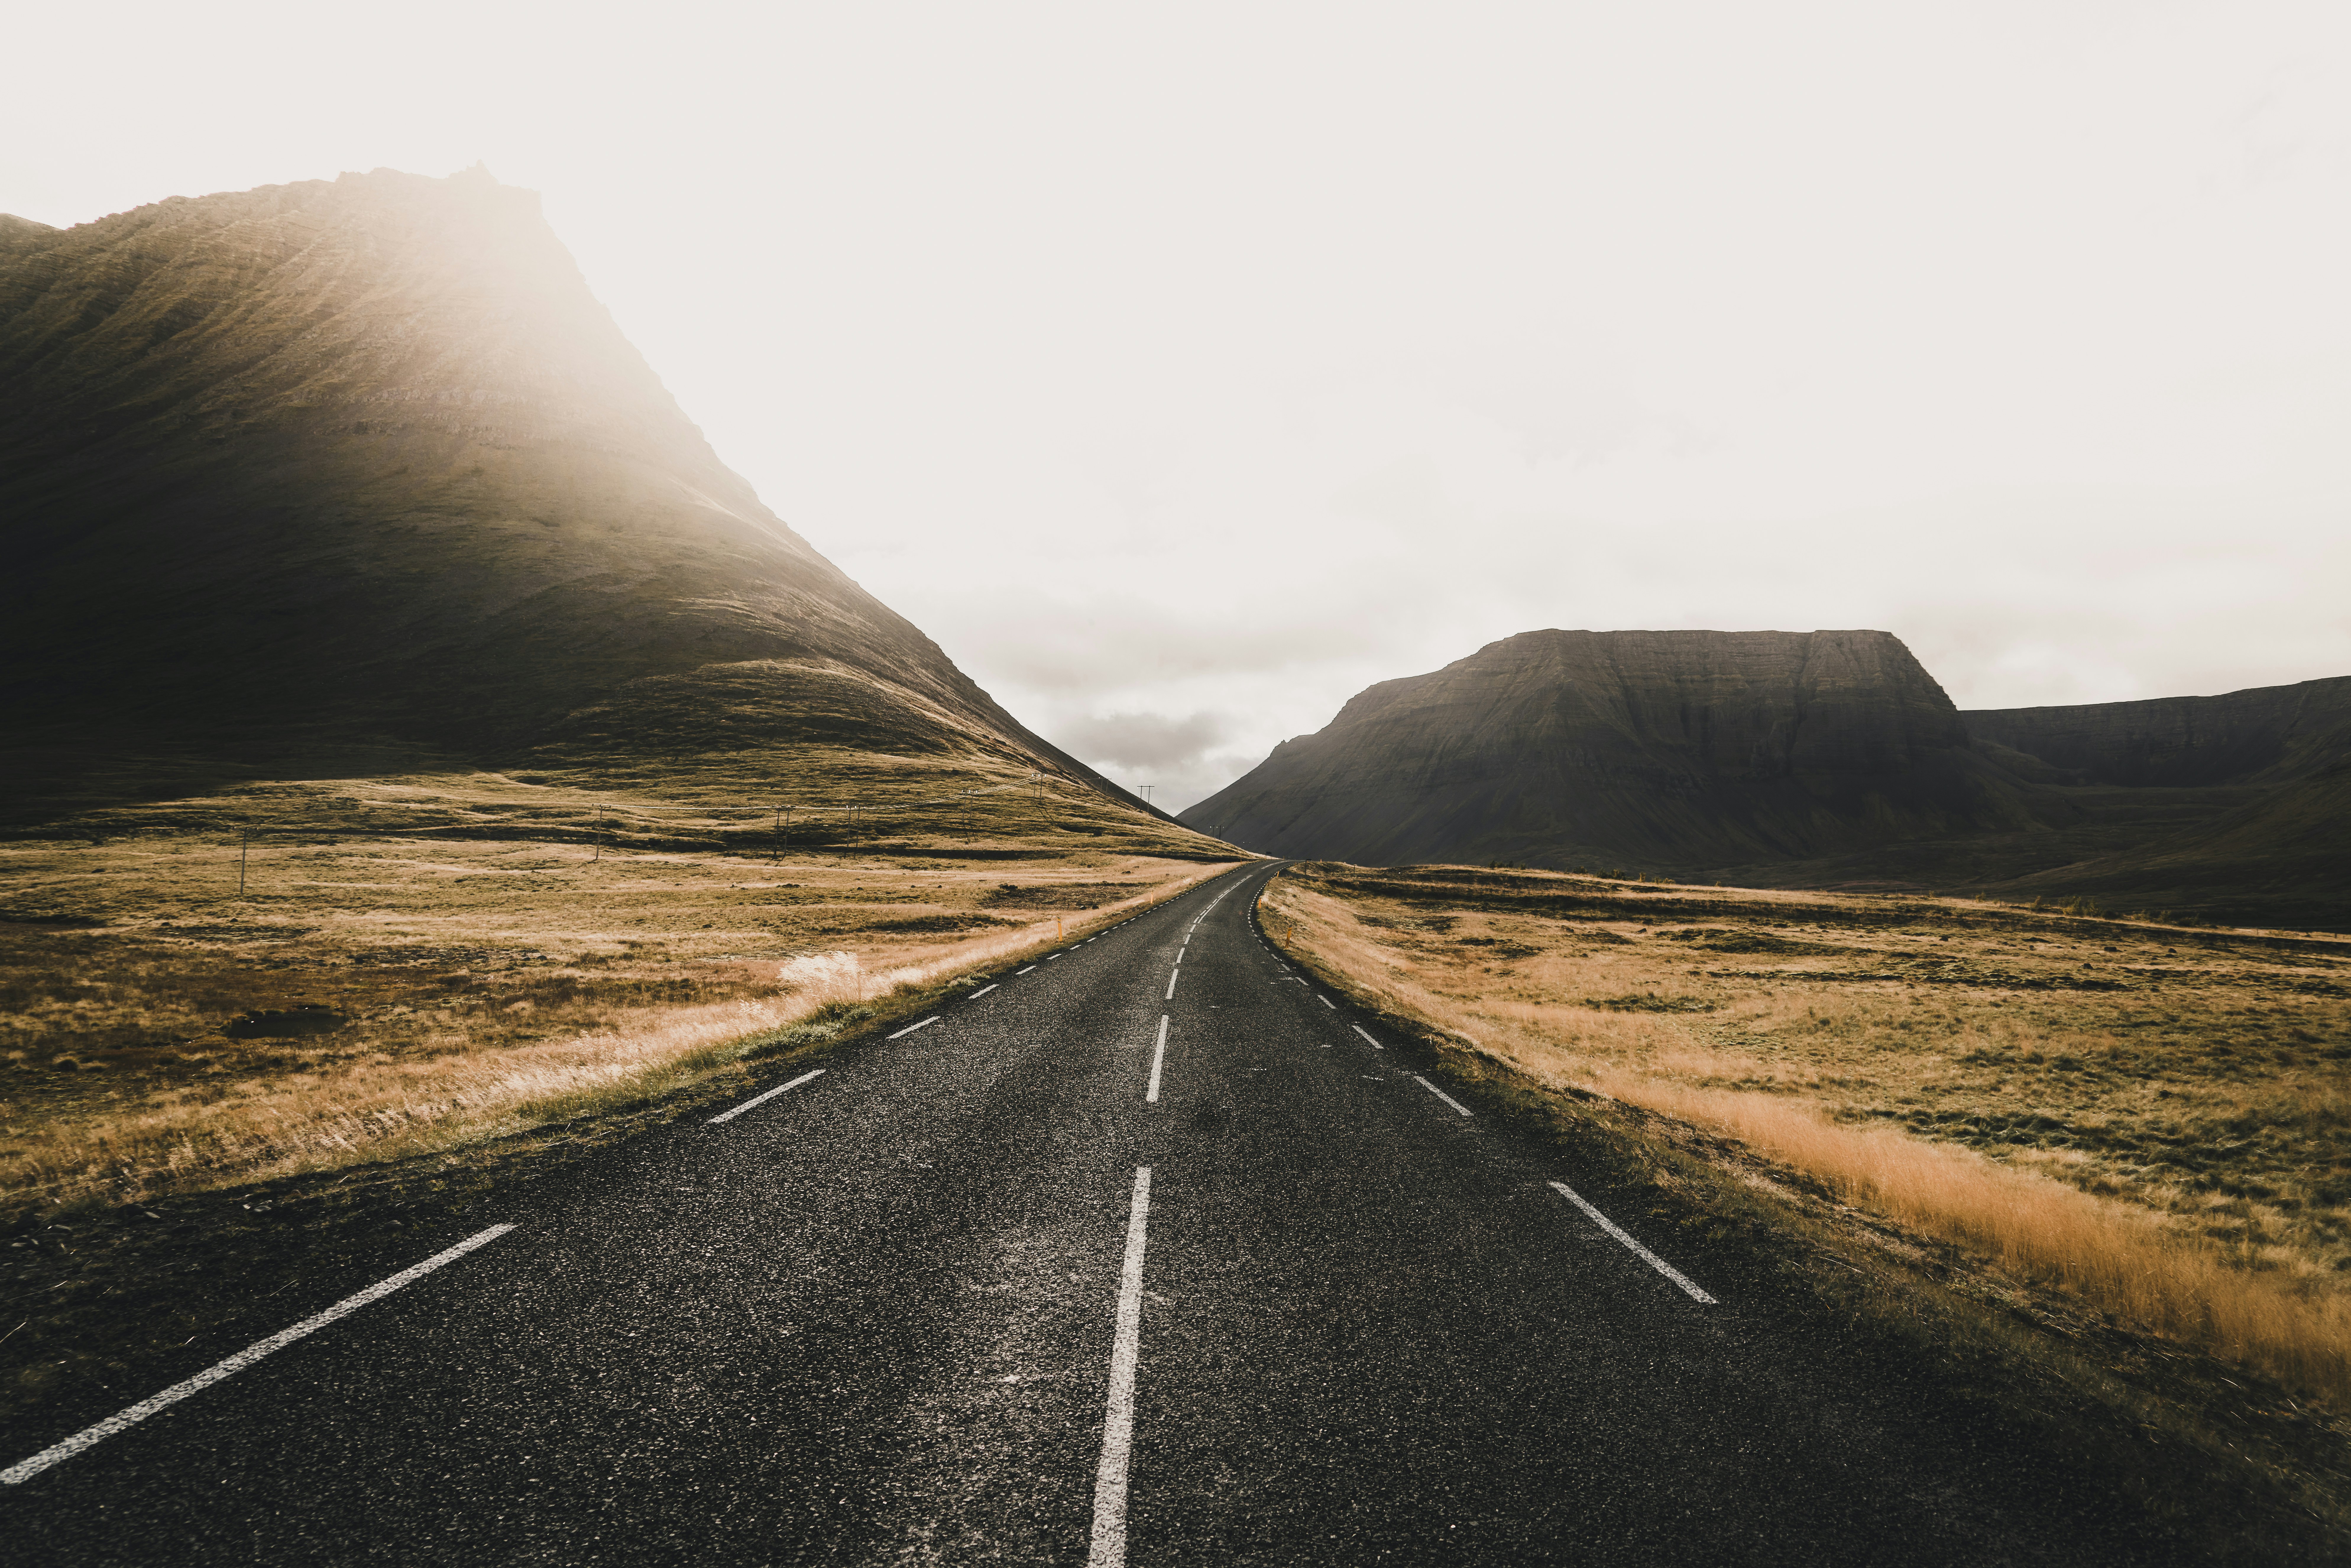 The endless Icelandic roads | Check out my Instagram - @WithLuke⠀ If you use my images and want to support me as a photographer any donations however small would be appreciated! Paypal - https://bit.ly/3dX4x1Y